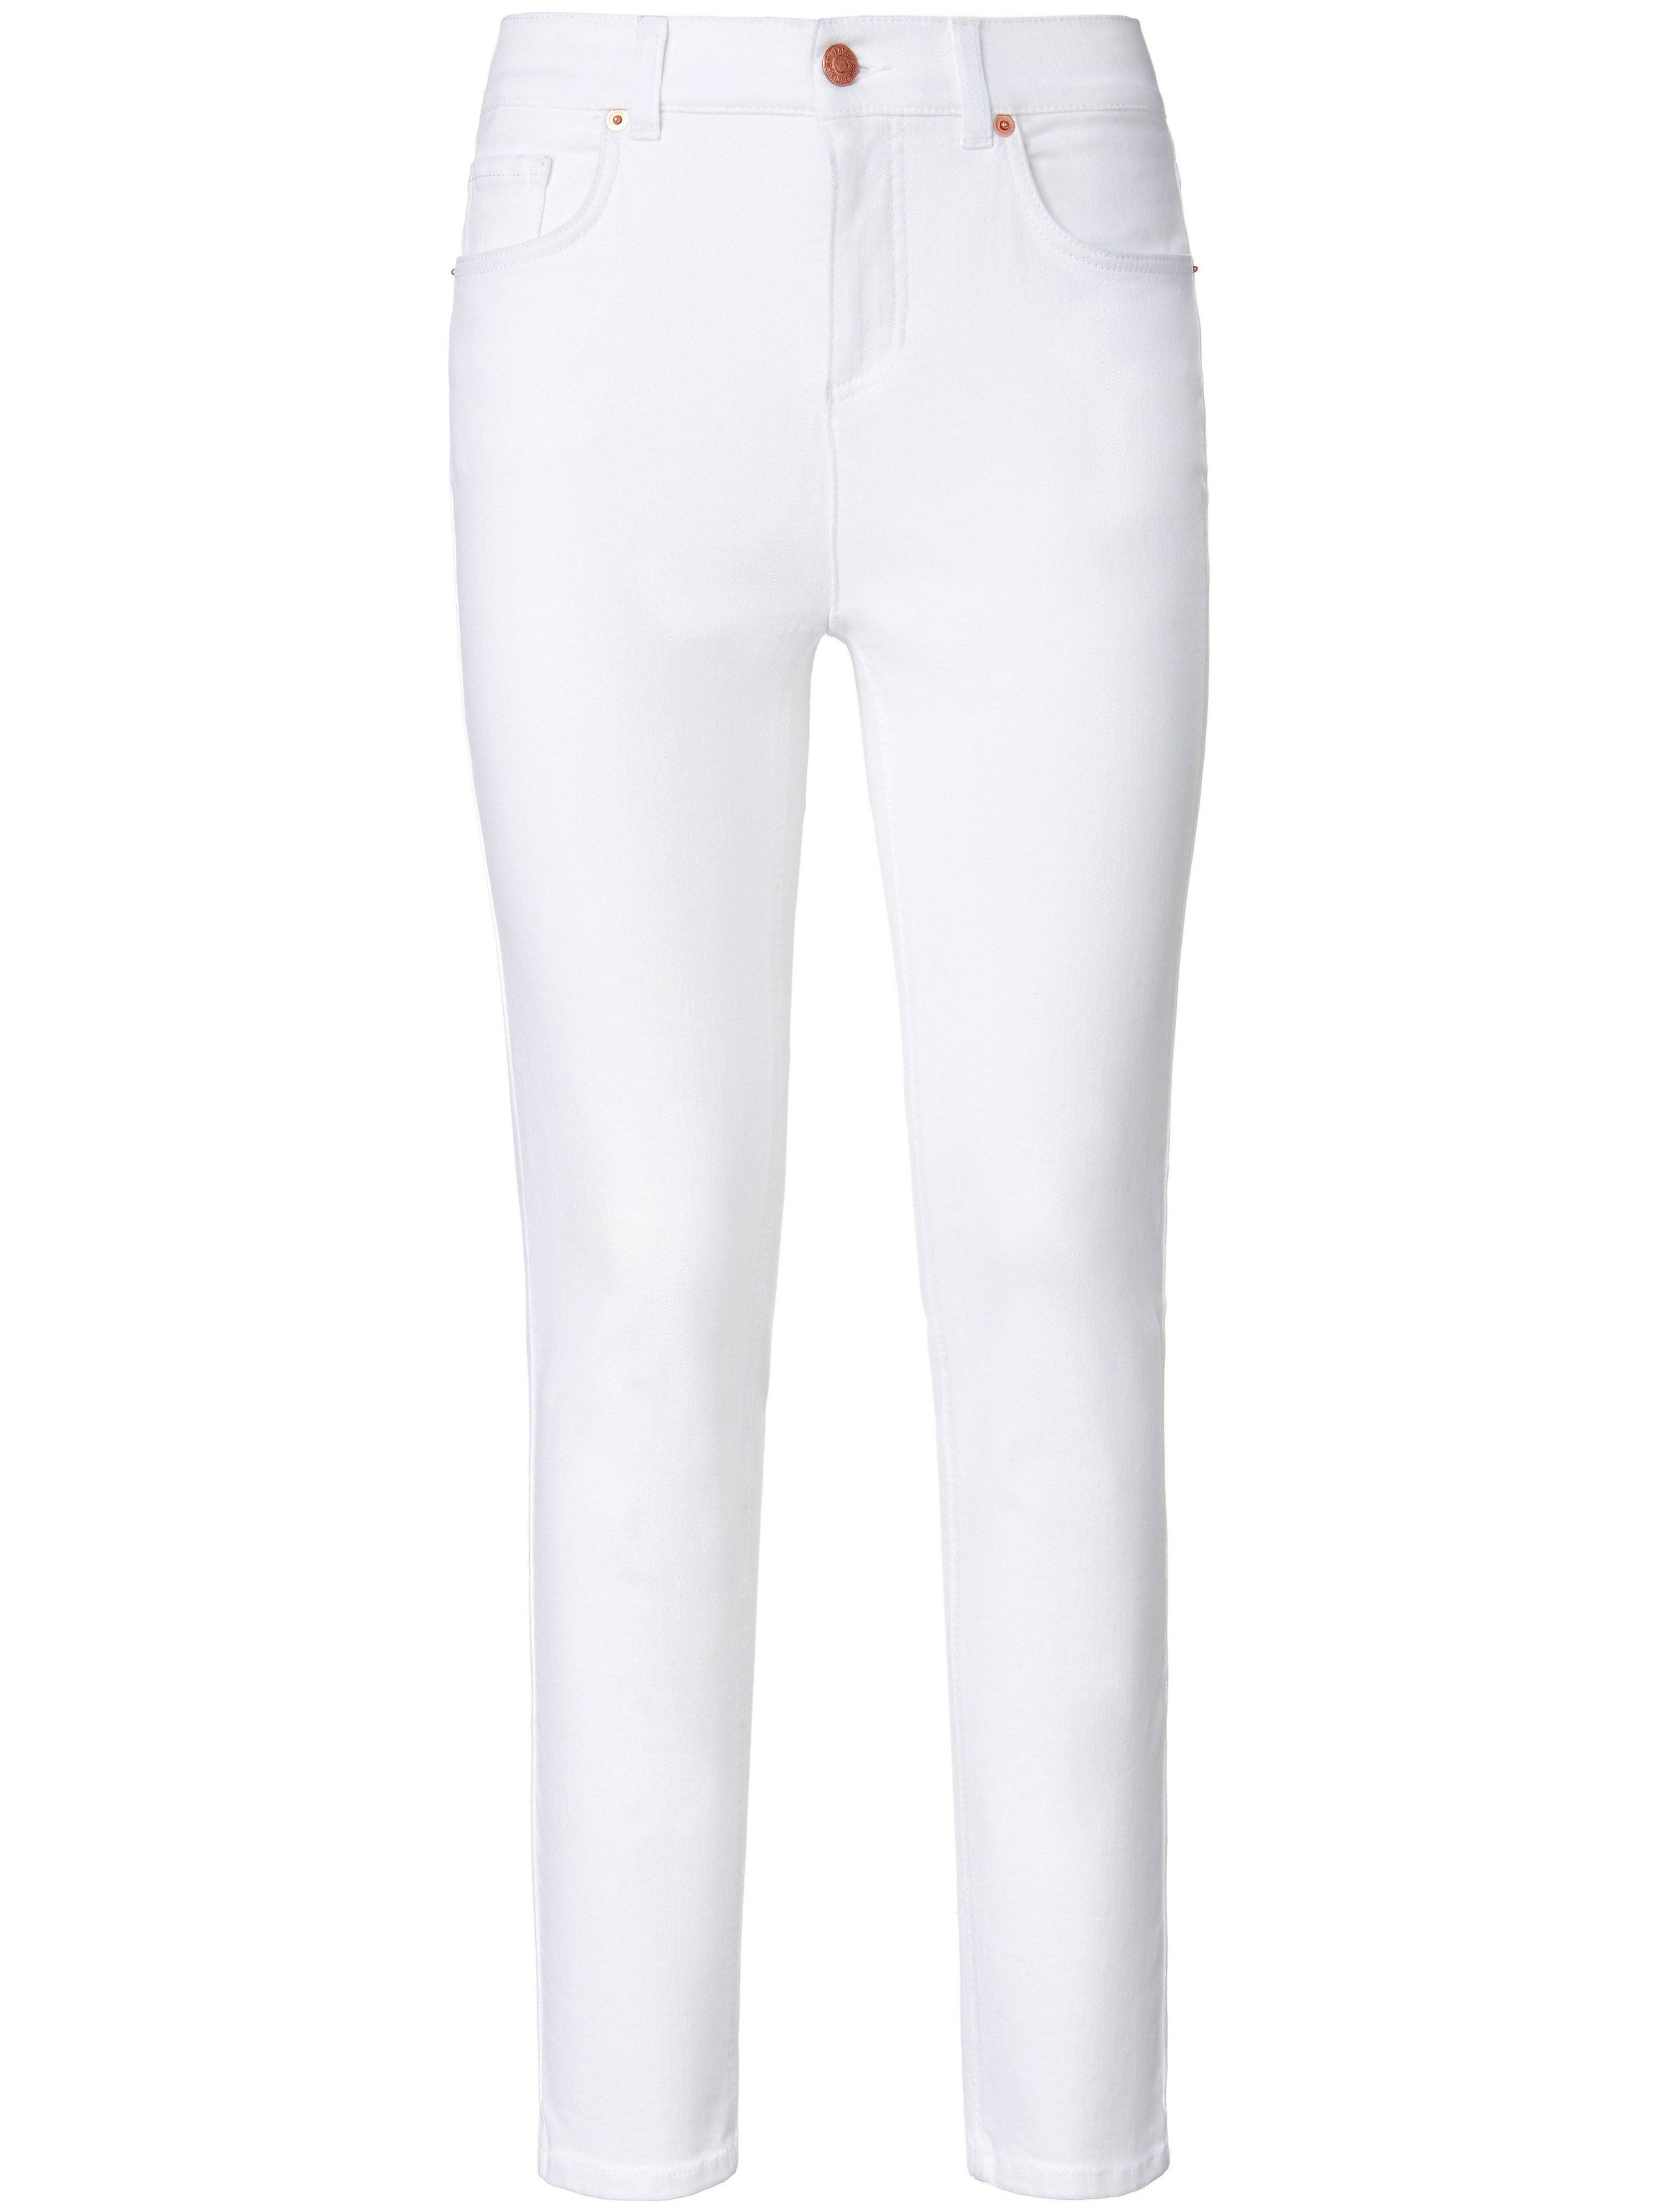 Le jean  WALL London blanc taille 38